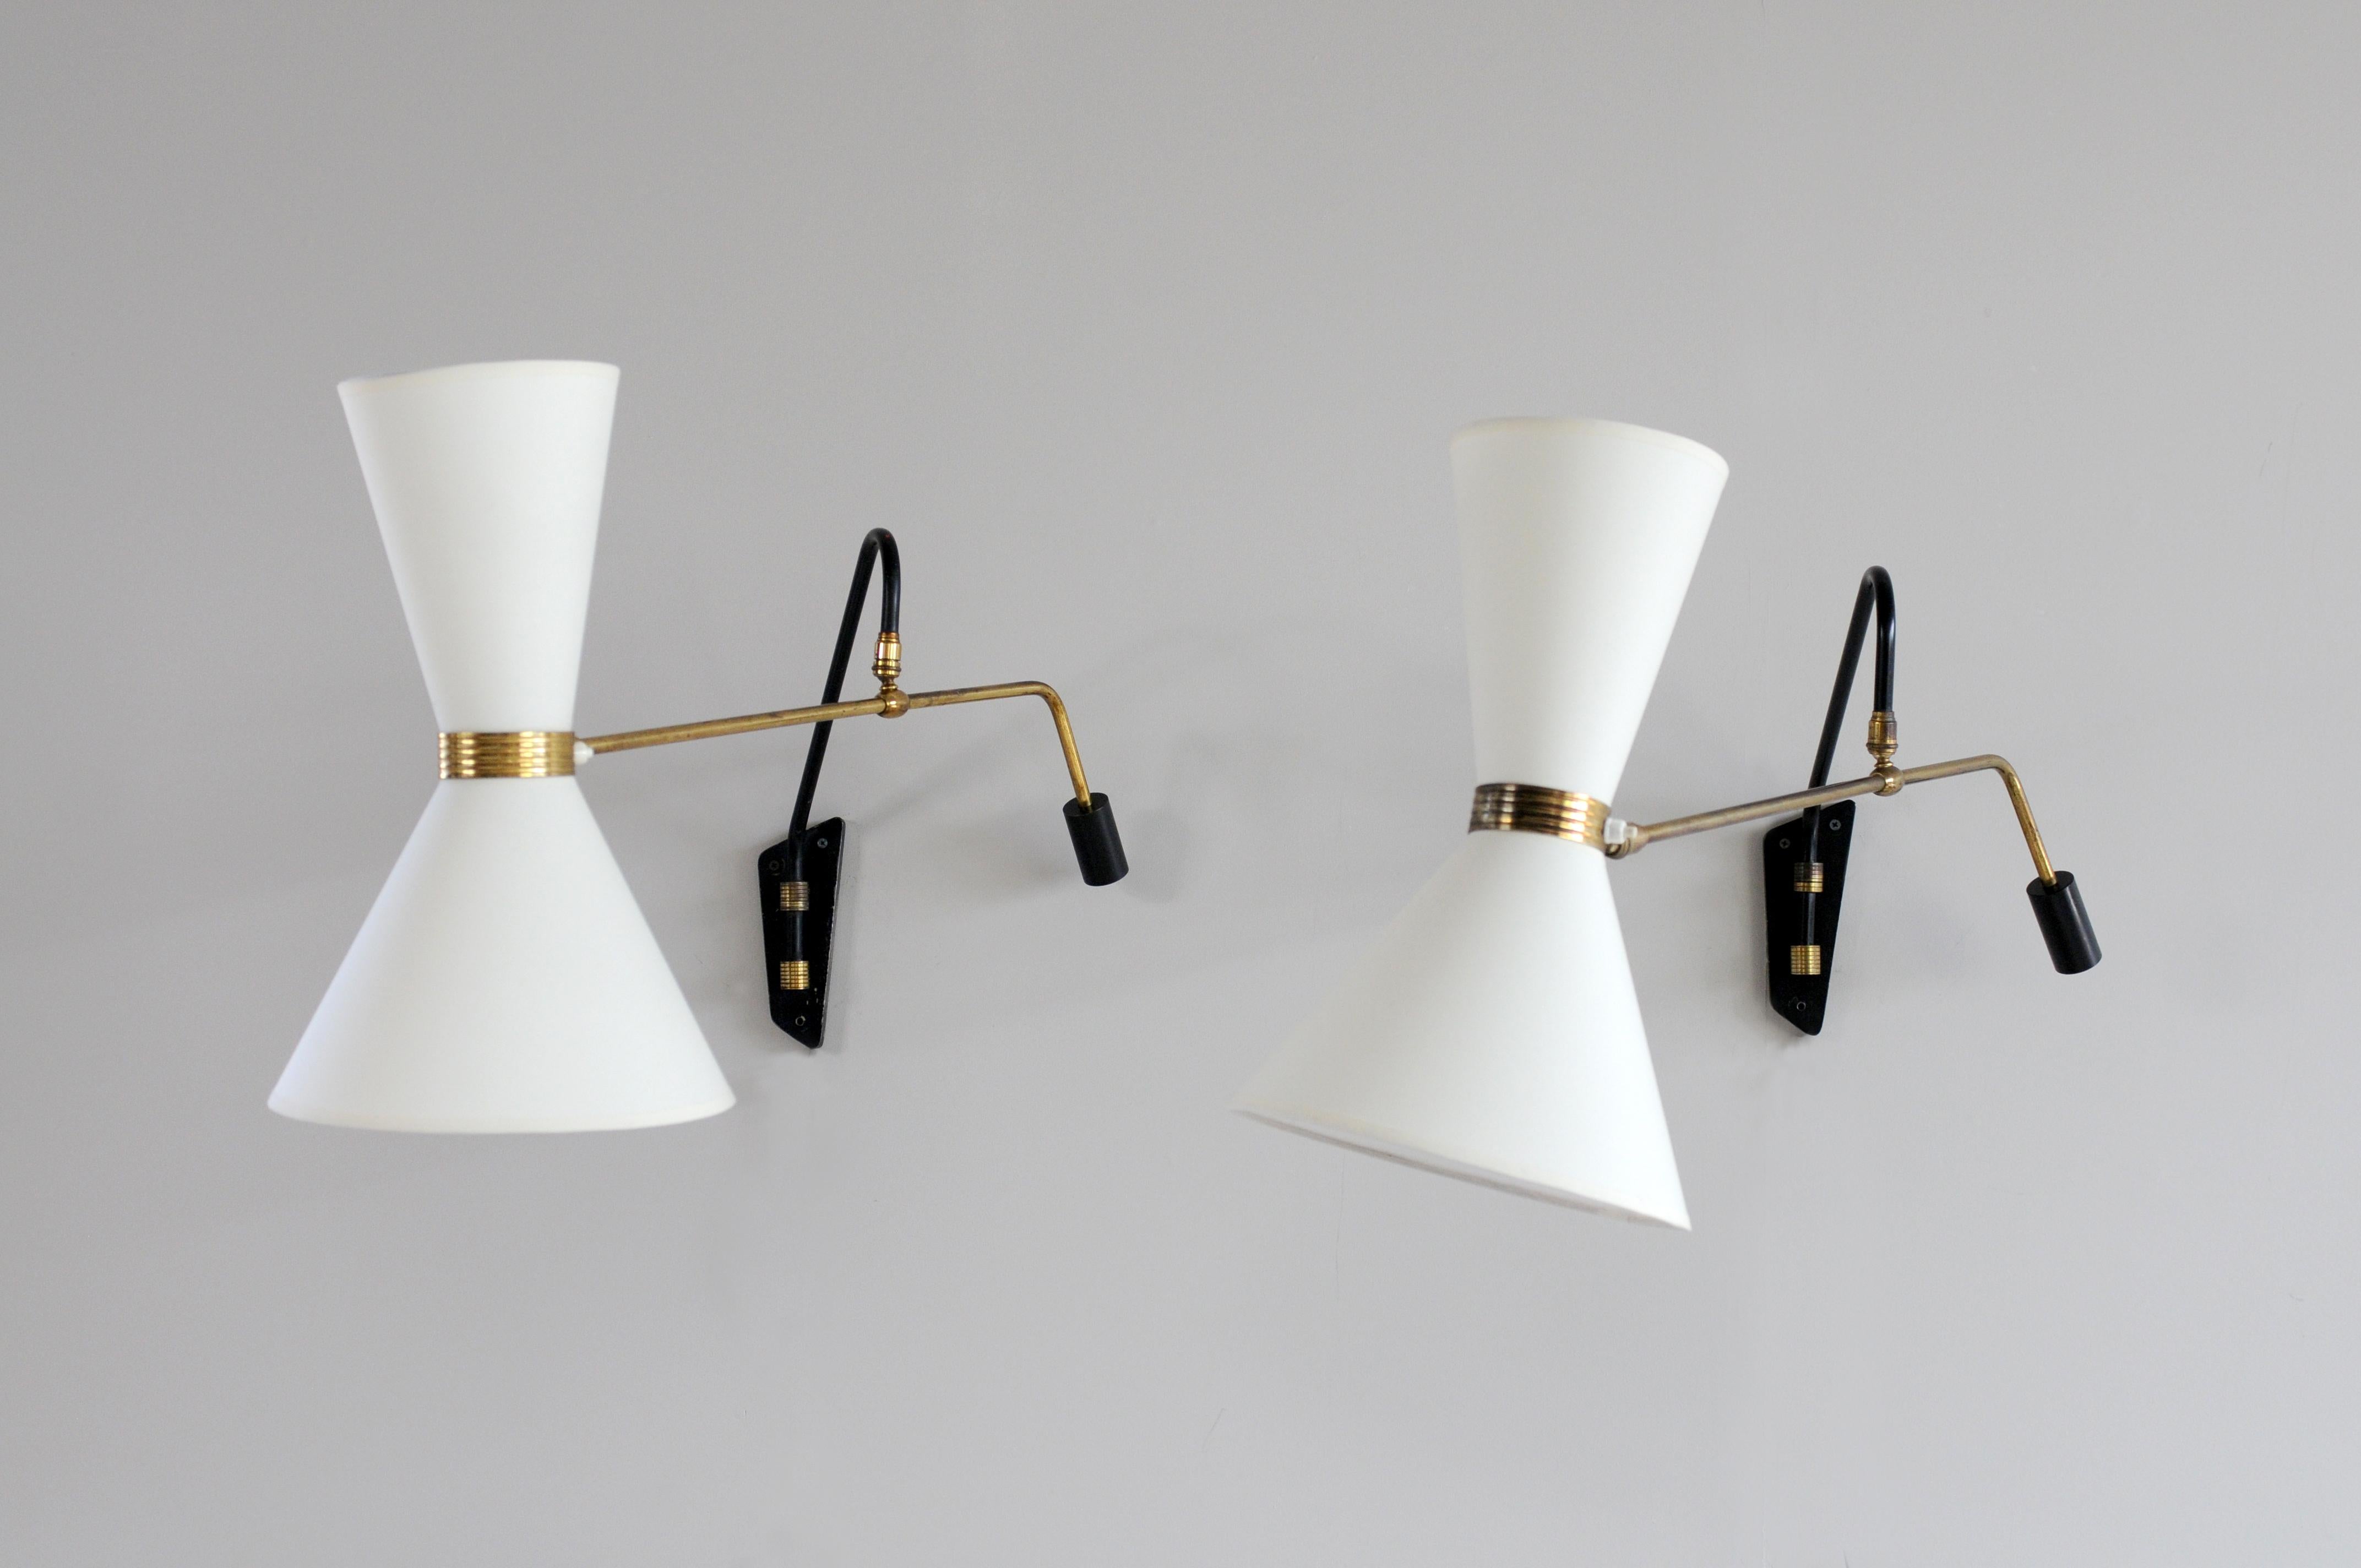 Rare pair of wall sconces from Lokiec establishments in black lacquered tubular metal and gilded brass, France, 1950. Listed under number 240, (number under the base), these luminaires have a large diabolo lampshade with dual ignition and several